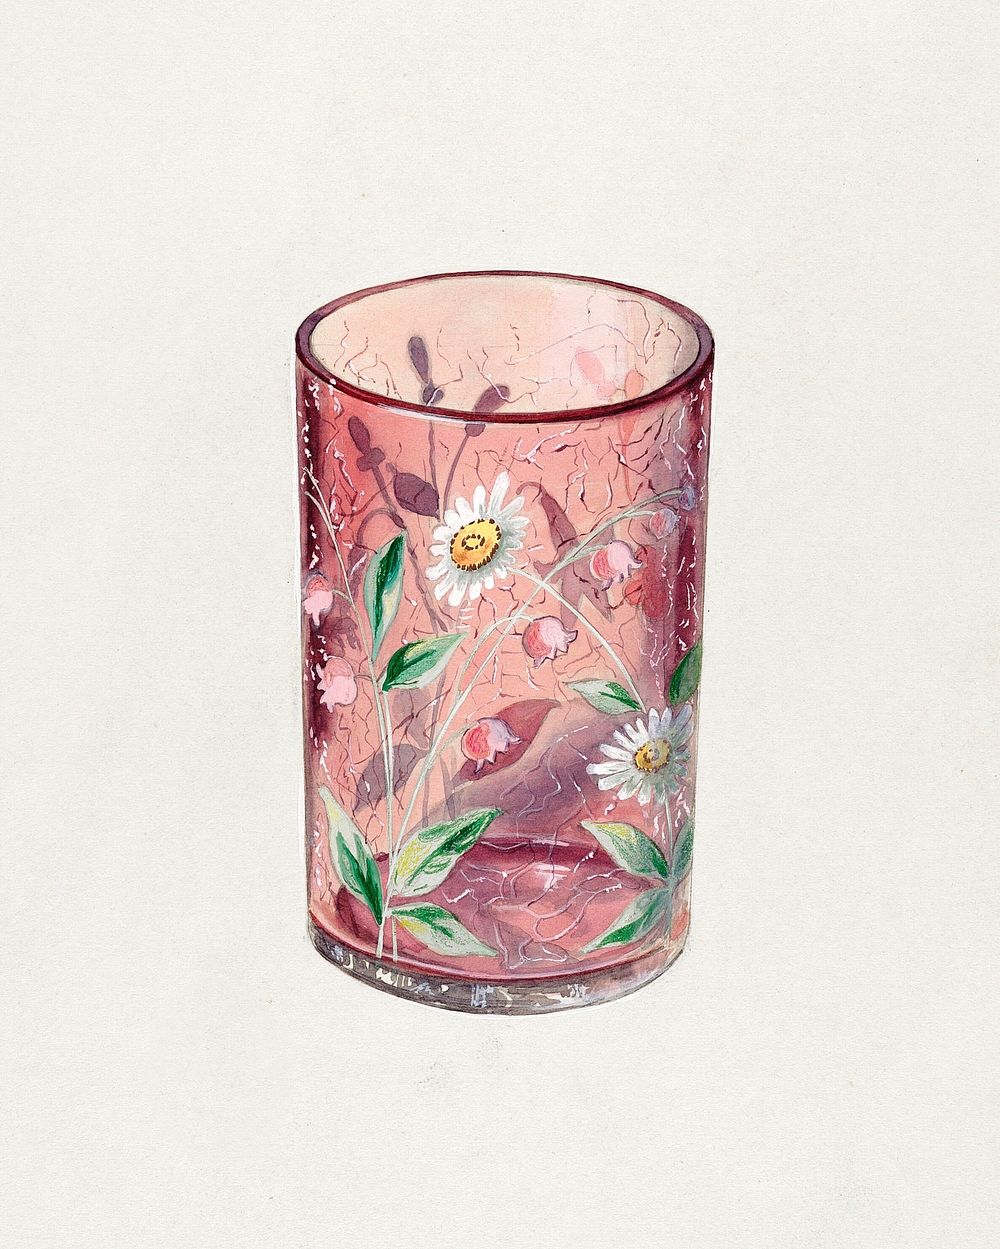 Water Glass (ca.1937) by Ralph Atkinson. Original from The National Gallery of Art. Digitally enhanced by rawpixel.